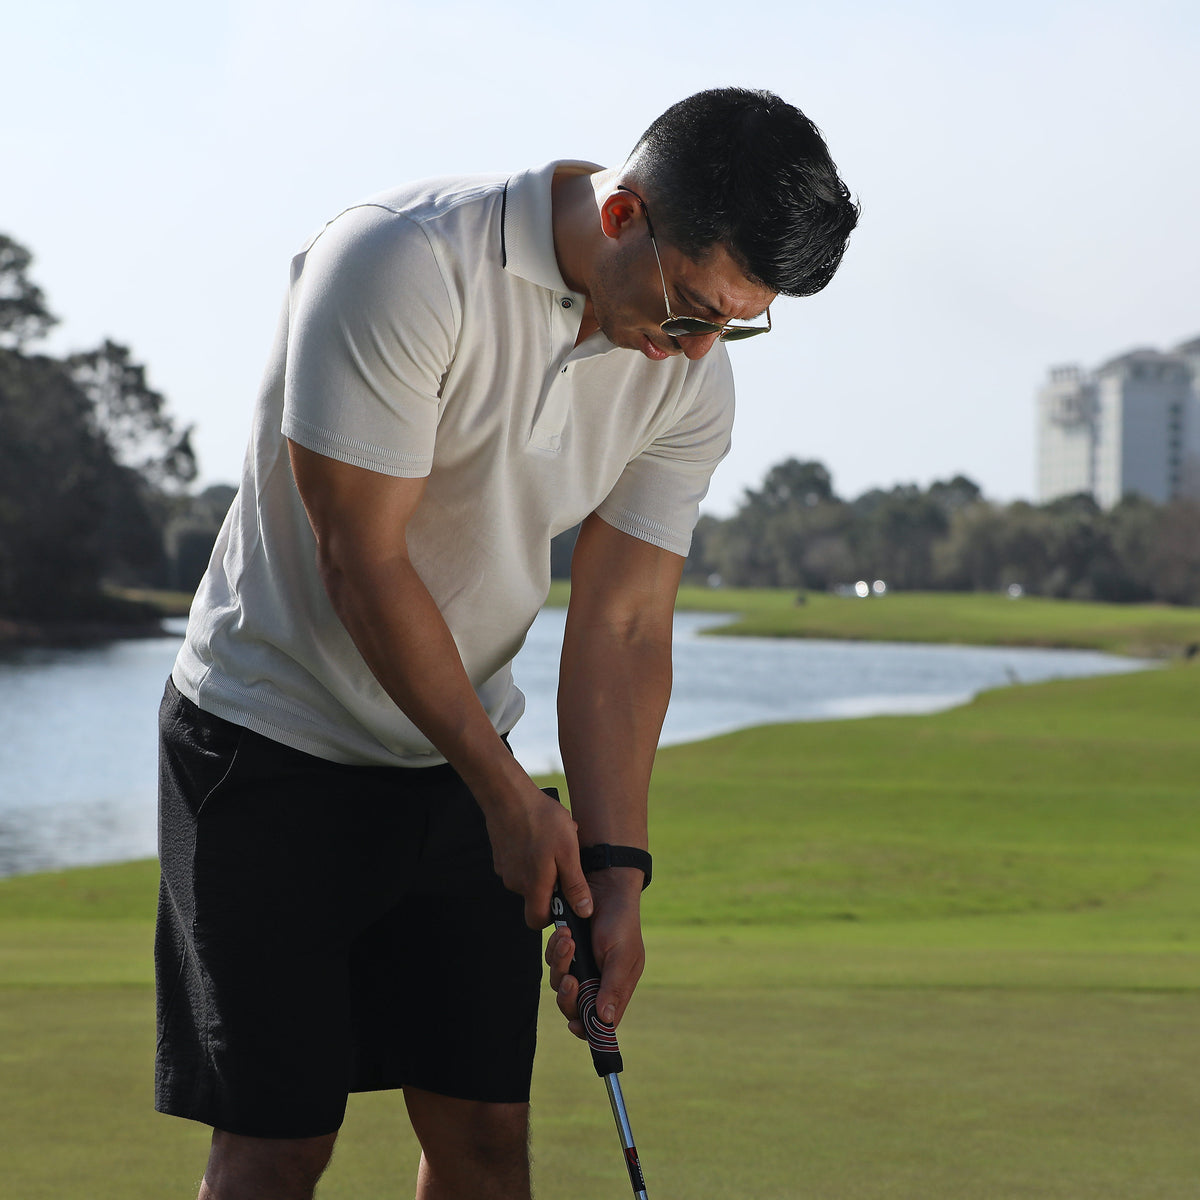 Our Sorrento White Fine Ribbed Light Weight Polo is your ticket to looking smart and feeling comfy on the course, pool, or beach. Whether you’re looking to make a statement on the links or just chill out in style, this white polo is perfect for any occasion. Lightweight and finely ribbed, this polo is sure to keep you feeling fine and free!